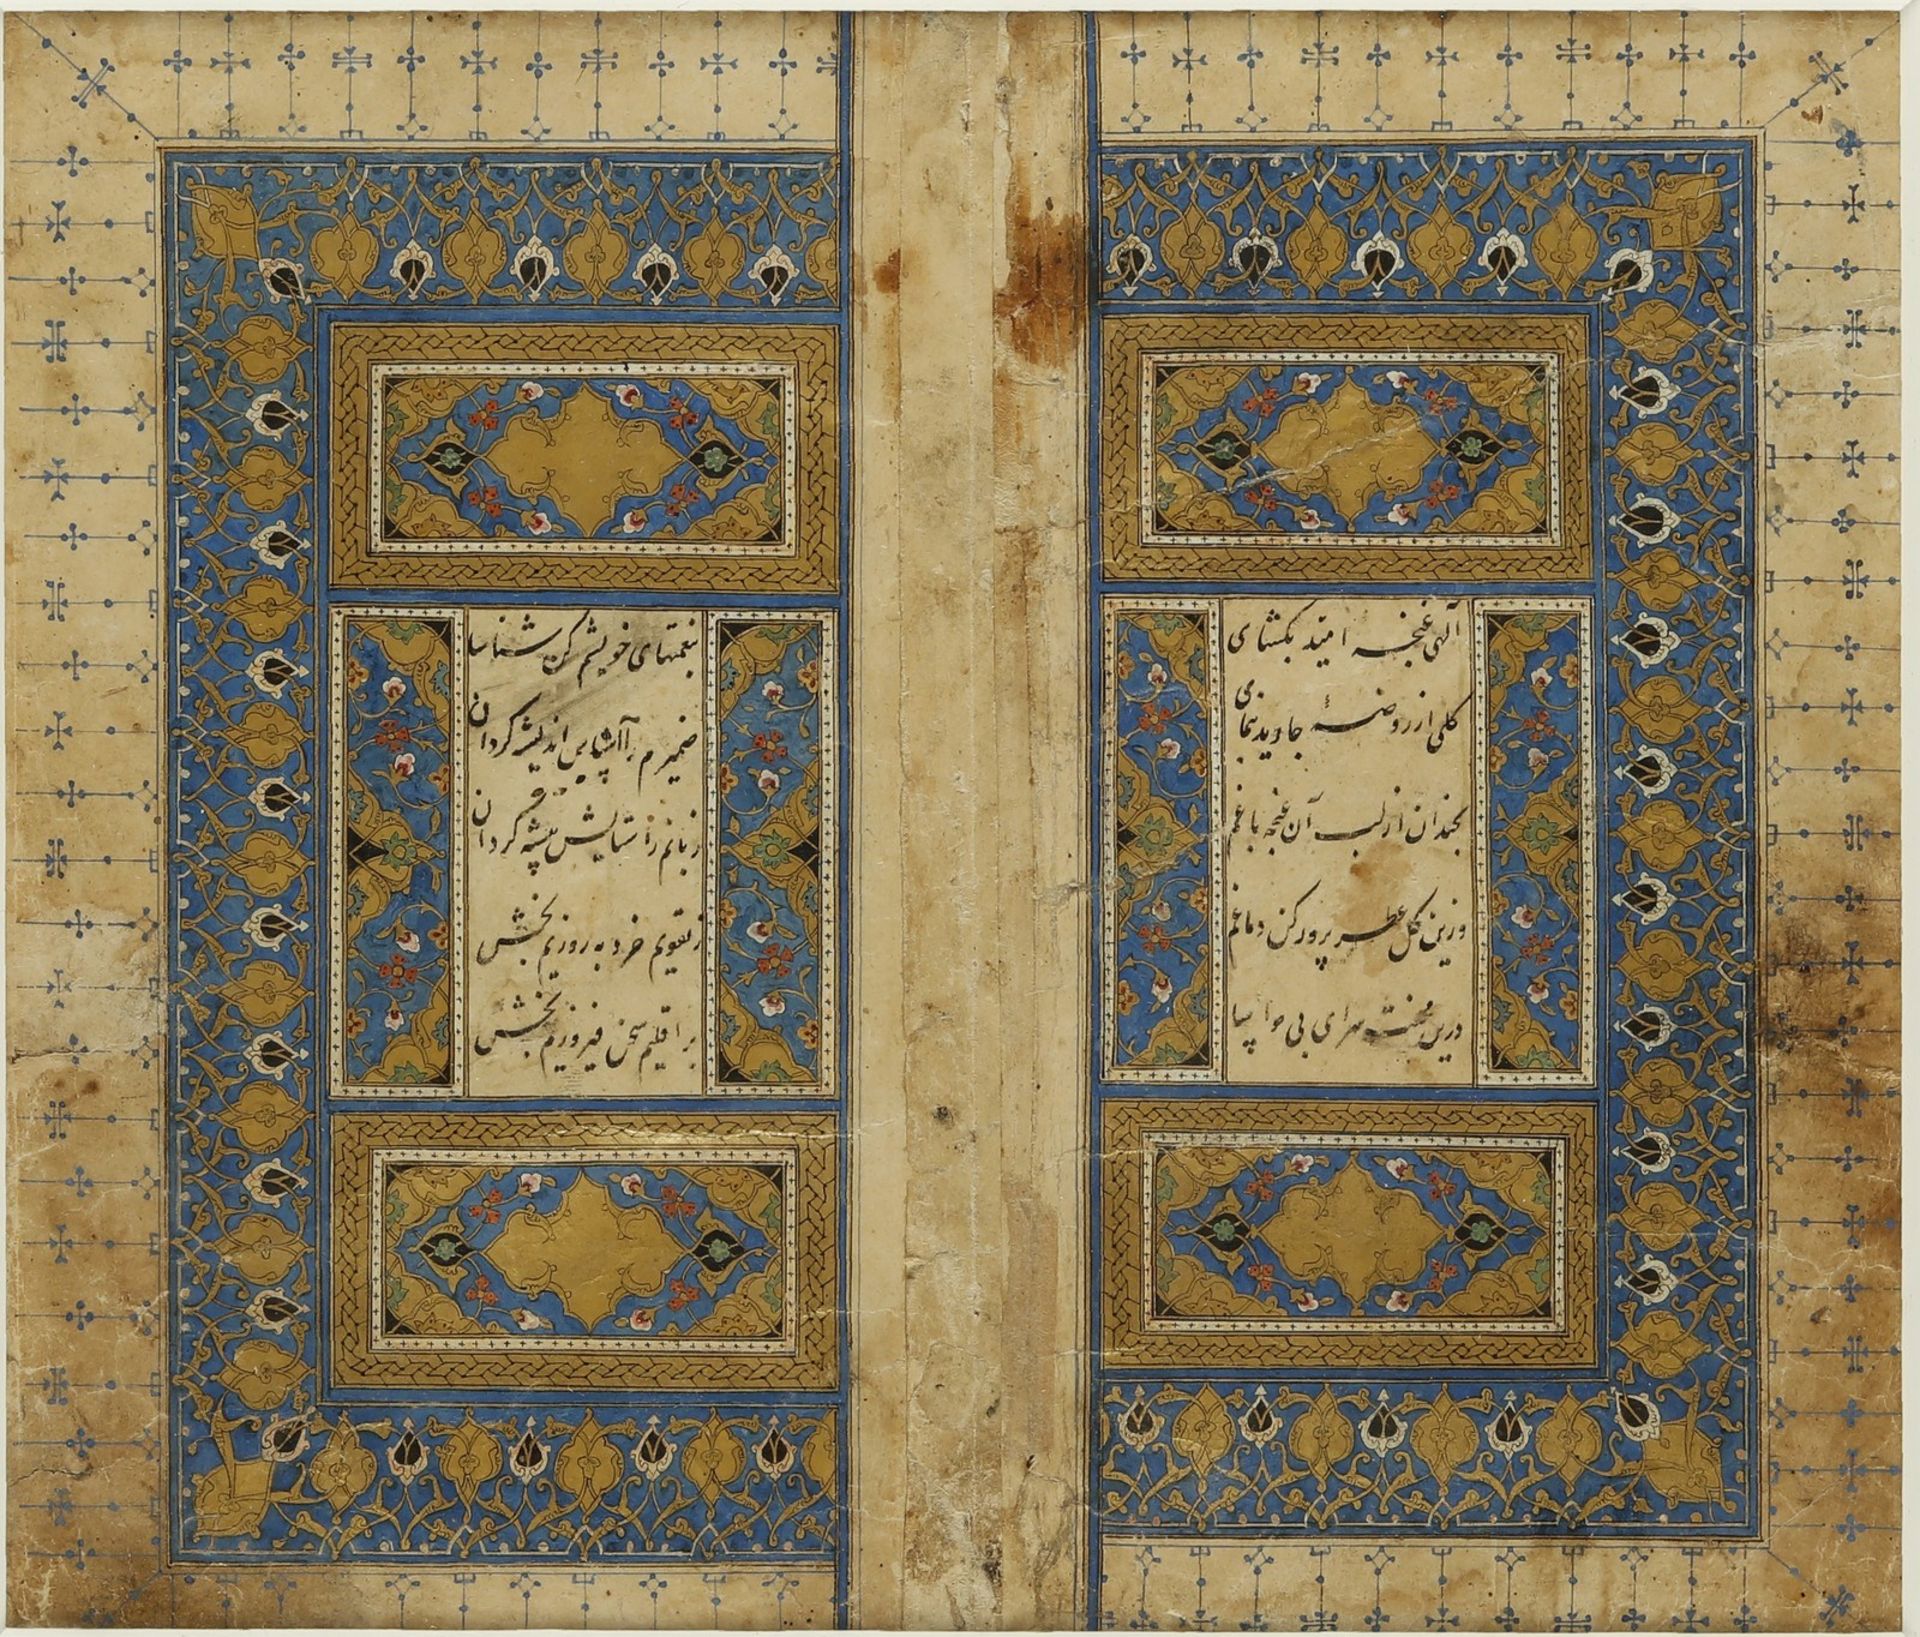 Arte Islamica A Timurid finely illuminated bifolio frontespiece by a Jami Ganjur Persia, possibly S